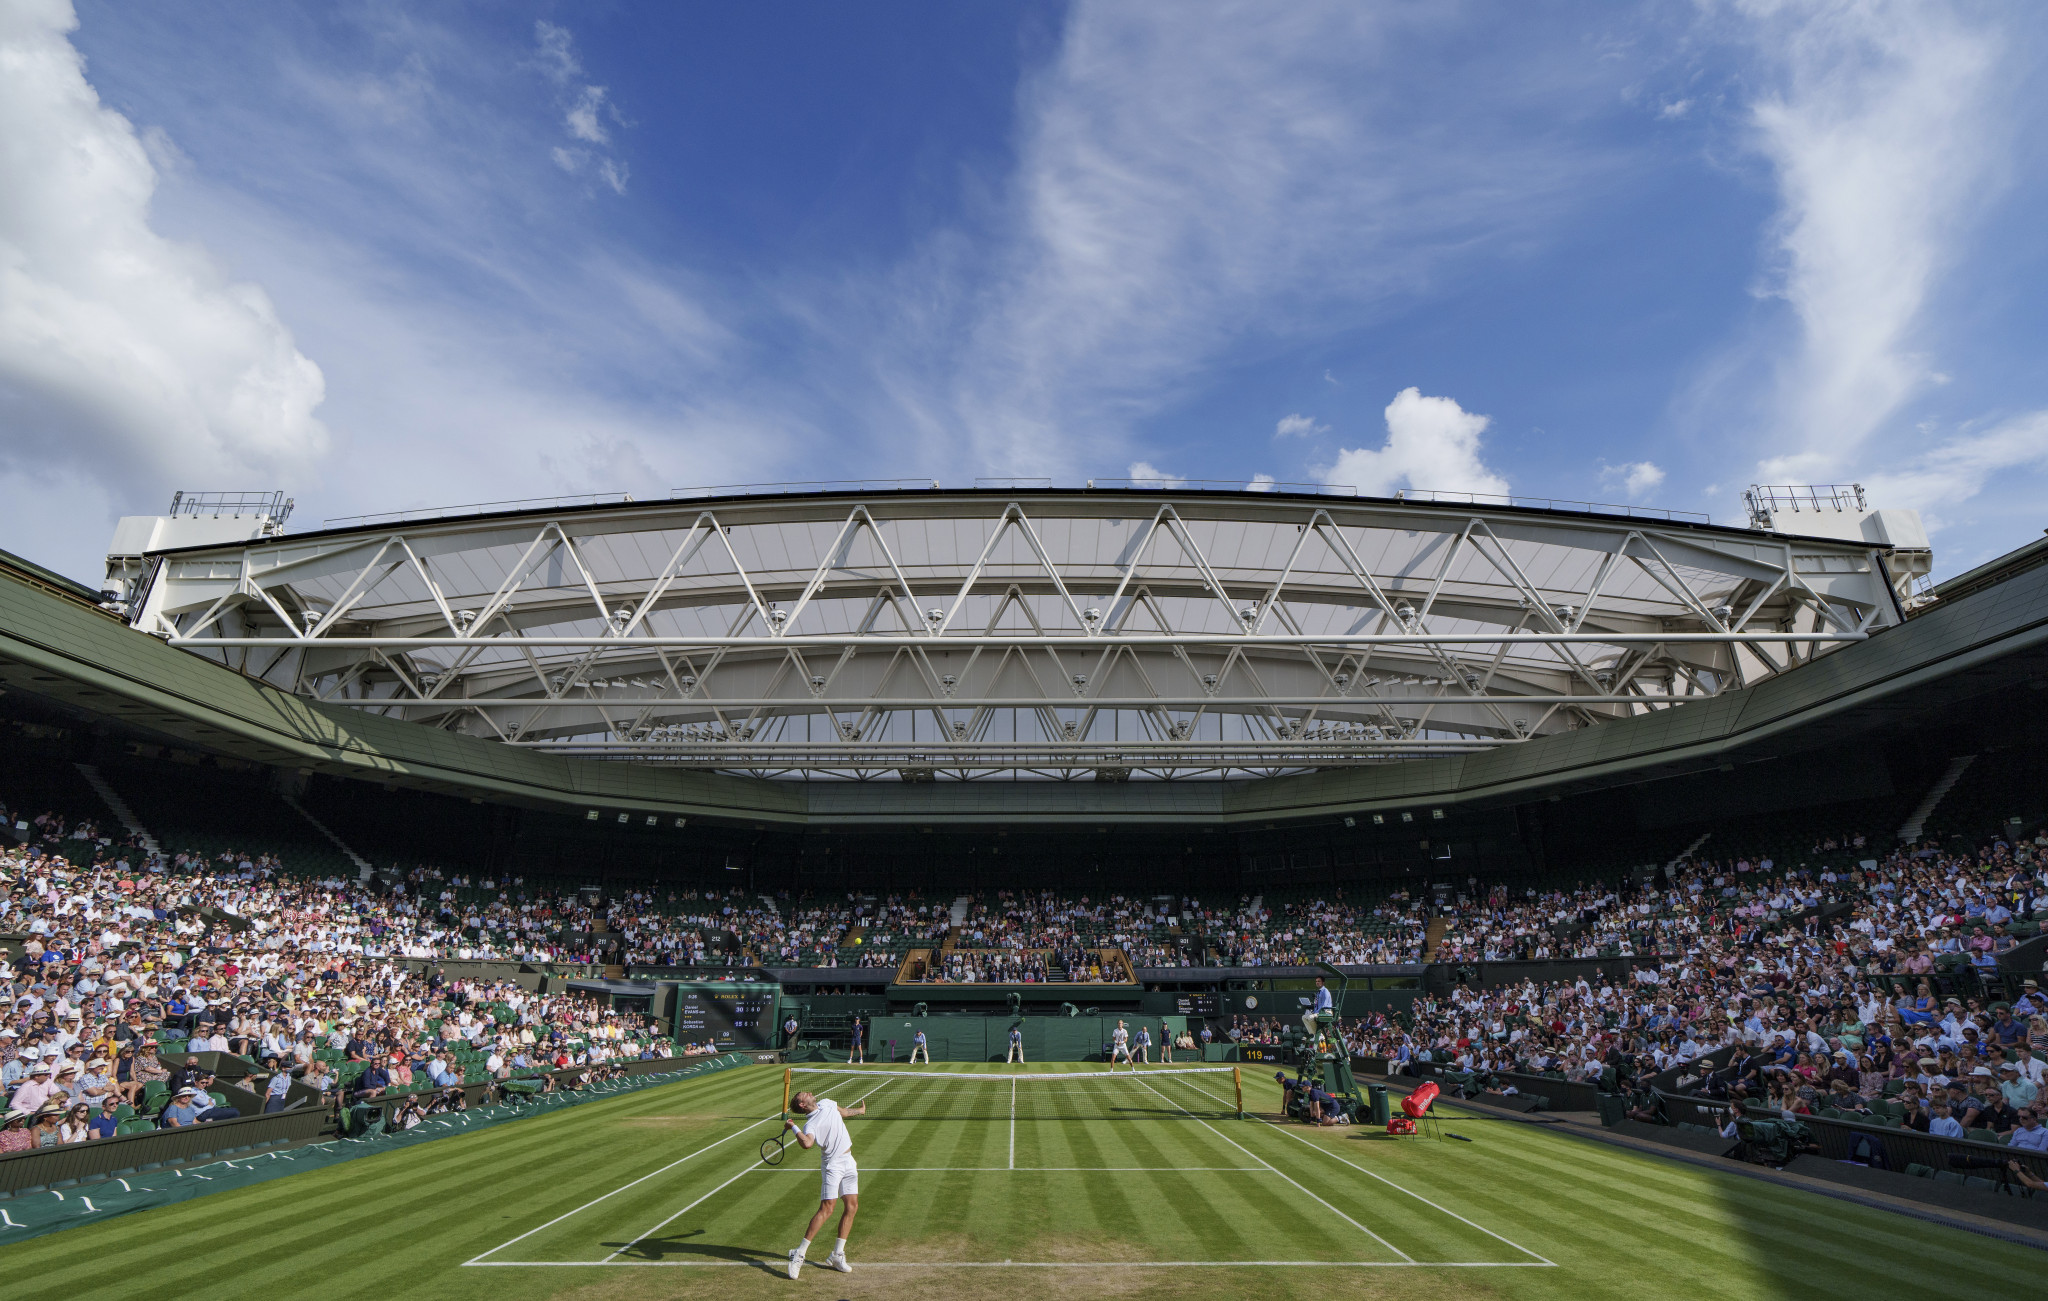 Wimbledon organisers are appealing the fine given to them by the WTA ©Getty Images